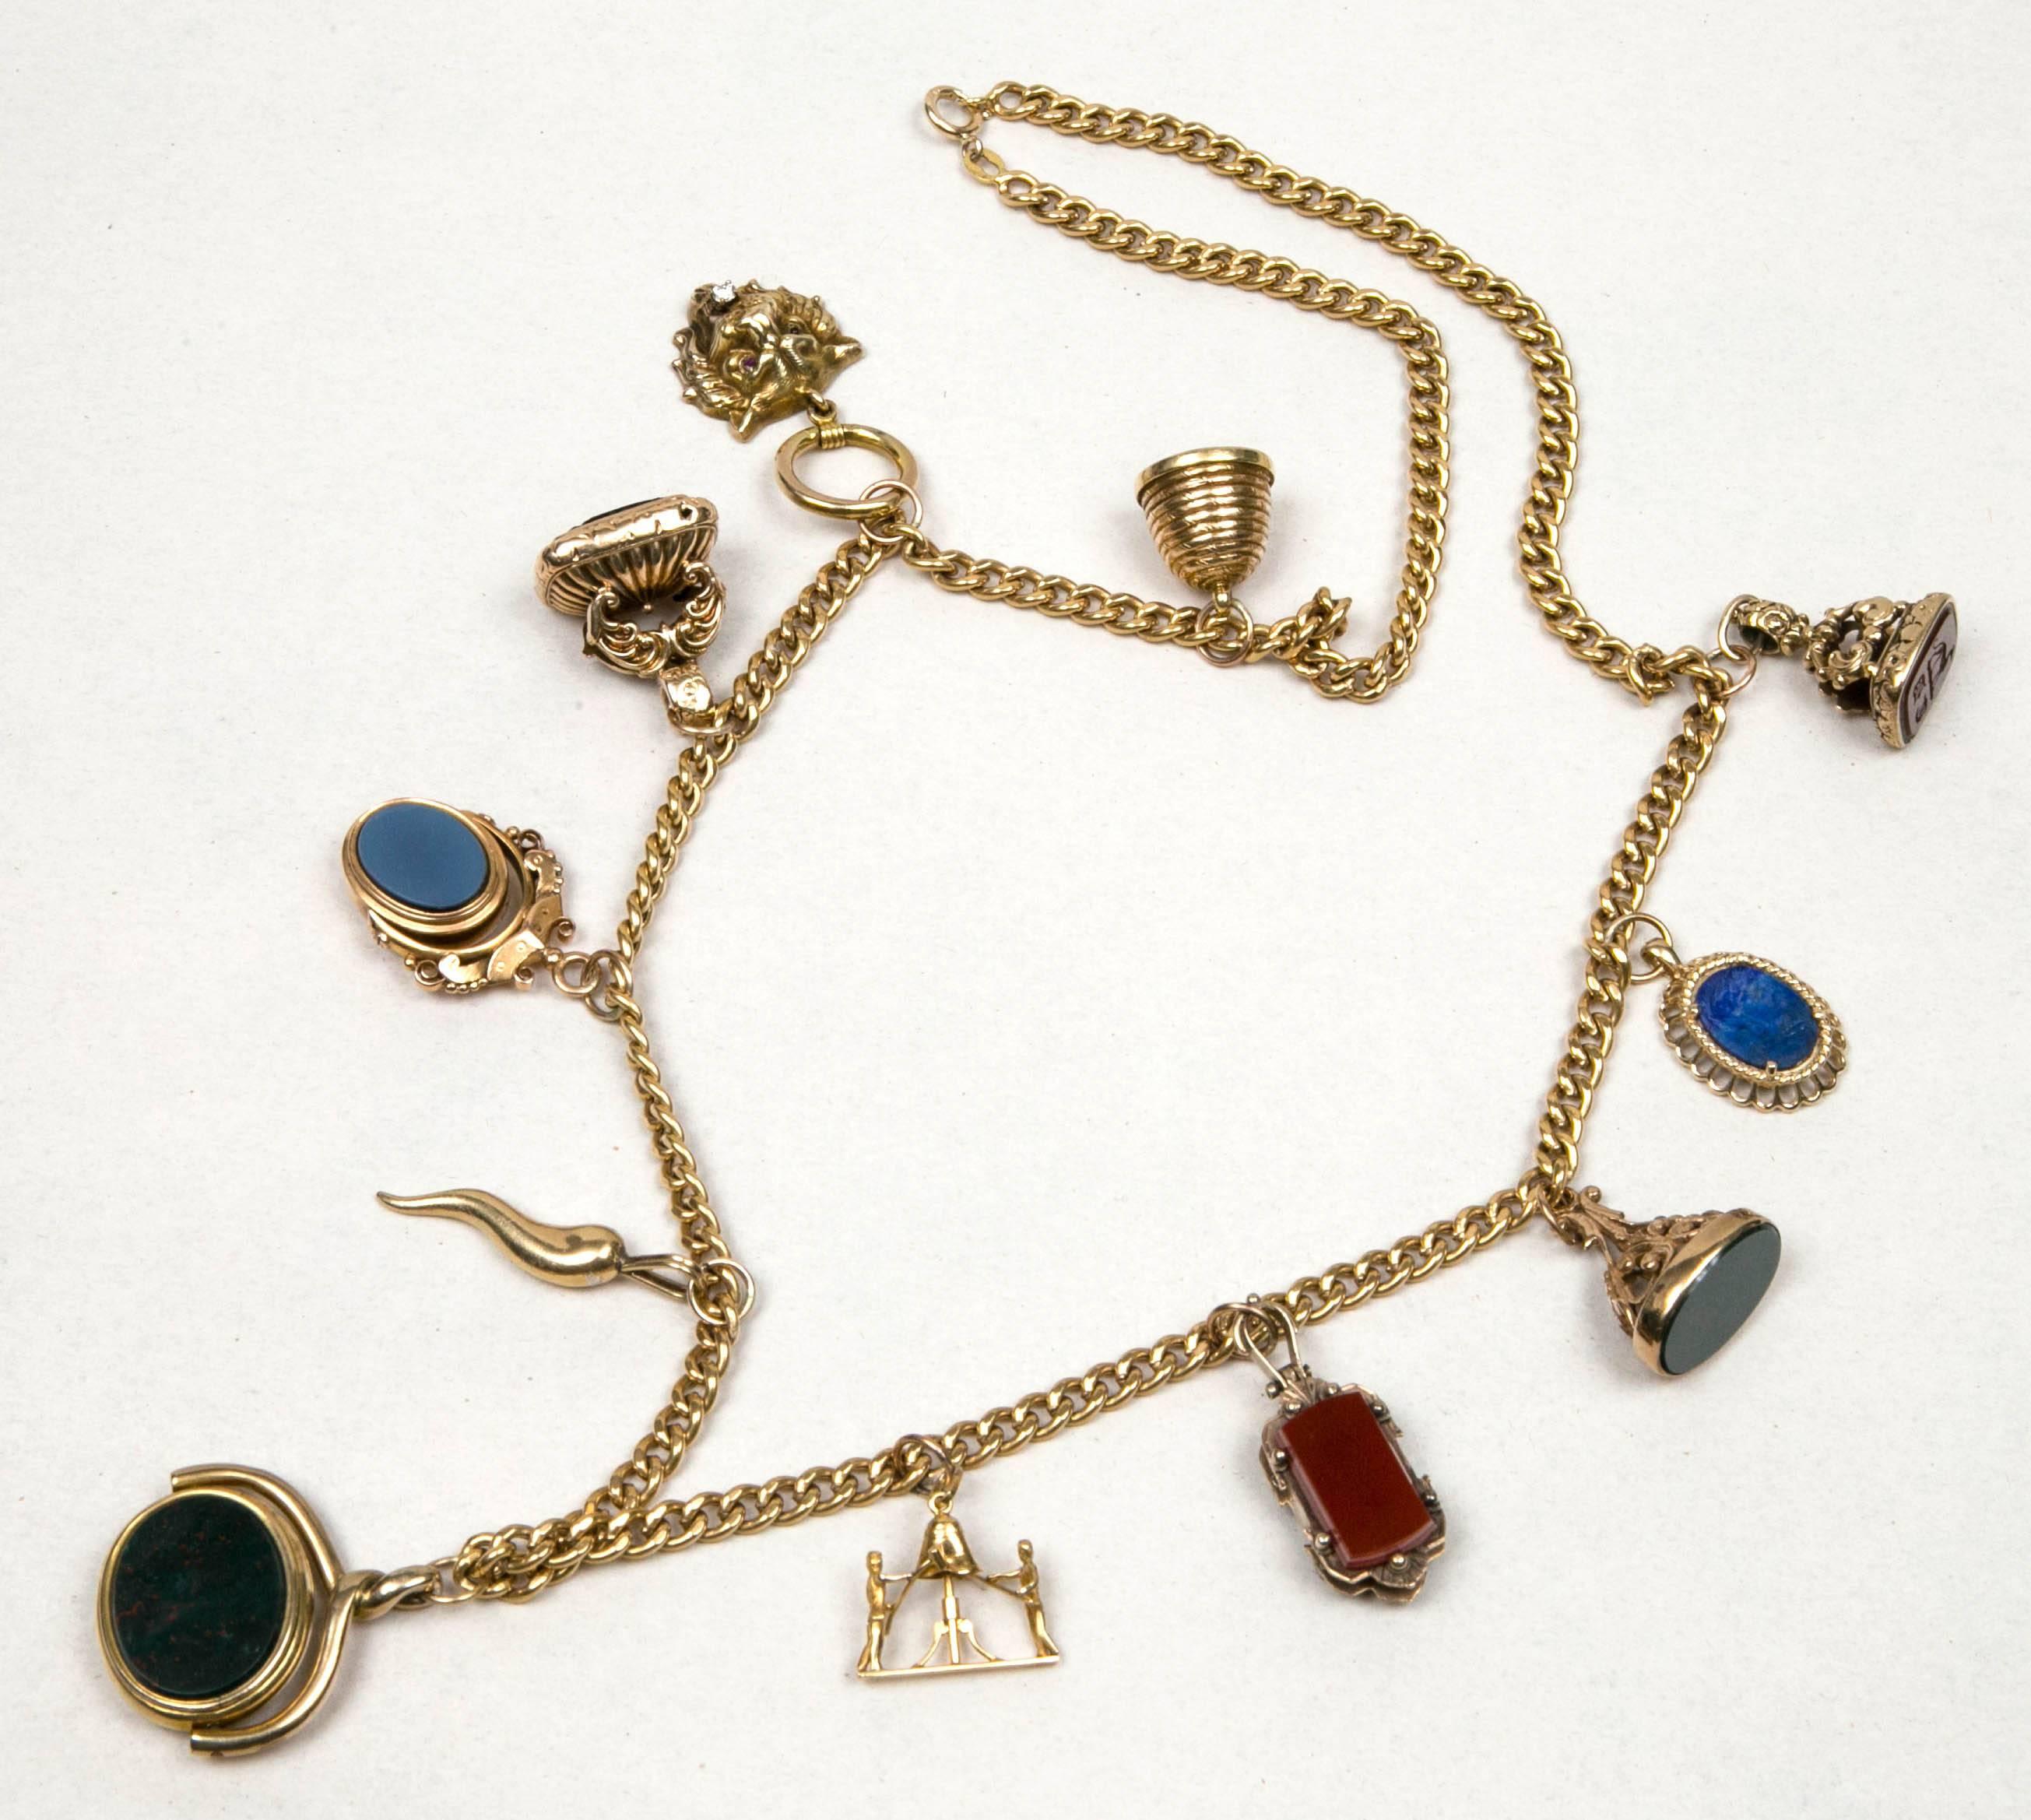 Charm-fob necklace, 18k chain from 1980's  with eleven 19th C gold fobs, some have stone intaglios, some have antique stones, and some are reversible. 
Very unusual. 